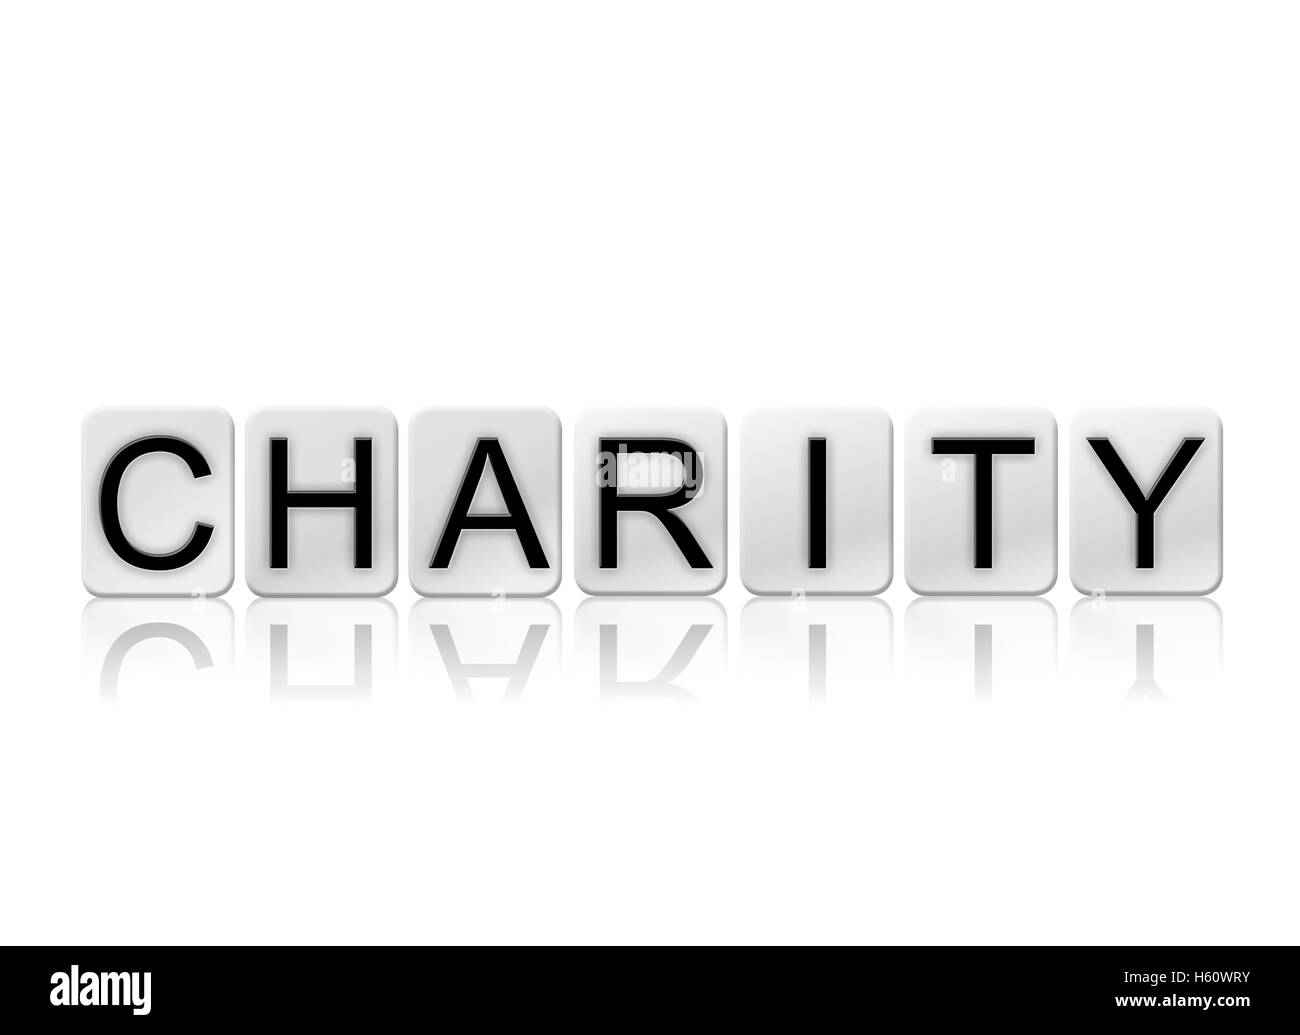 The word 'Charity' written in tile letters isolated on a white background. Stock Photo